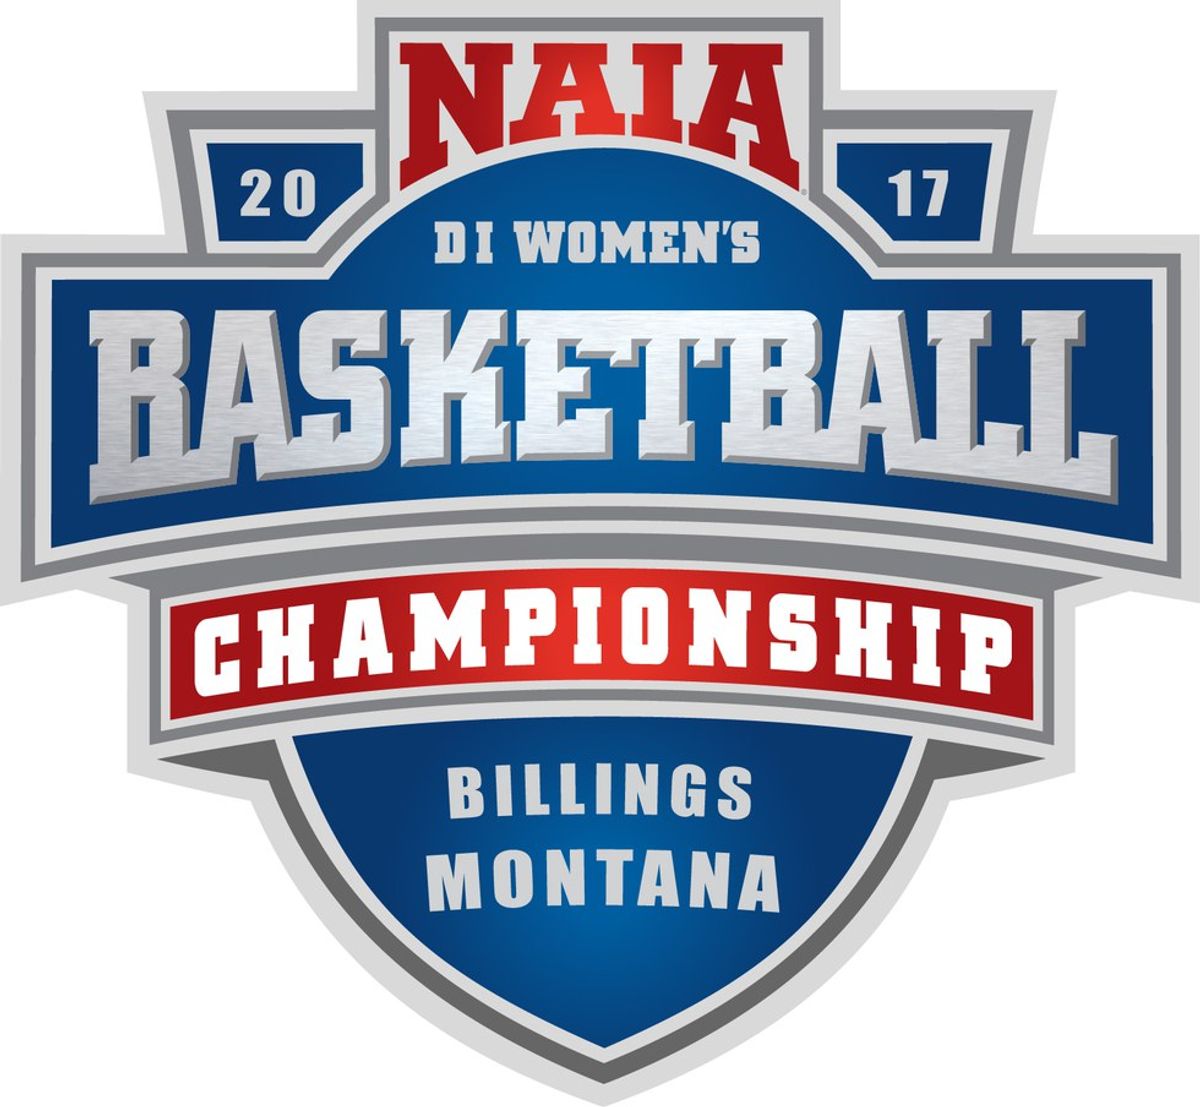 NAIA Women's Basketball Championship Is Coming To Billings